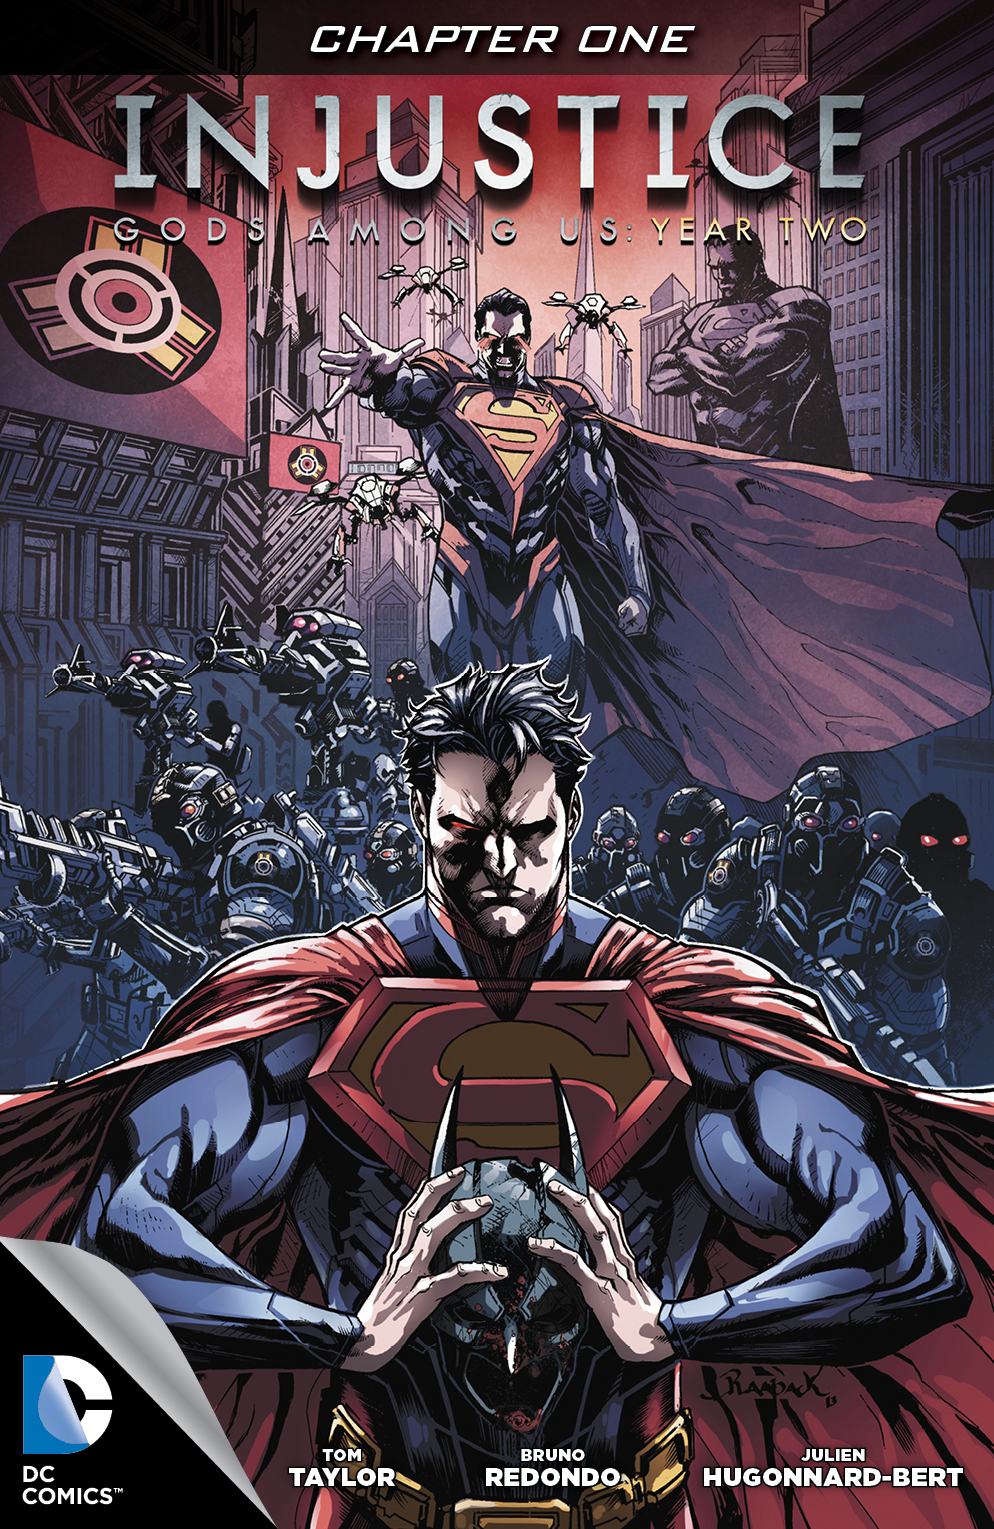 Injustice: Gods Among Us: Year Two #1 preview images